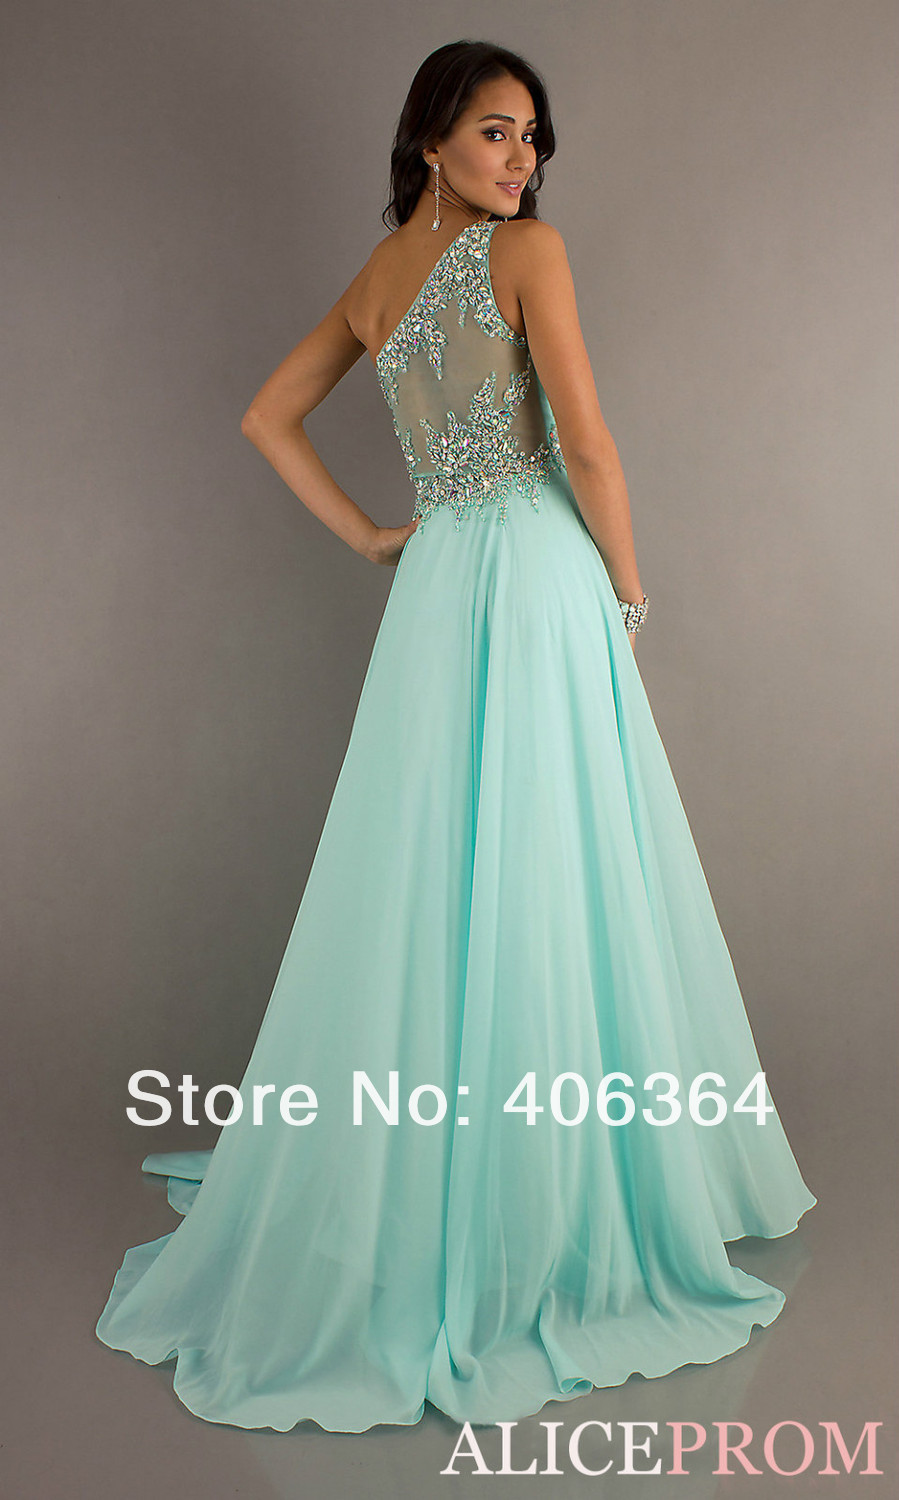 Green And Silver Prom Dresses And How To Look Good